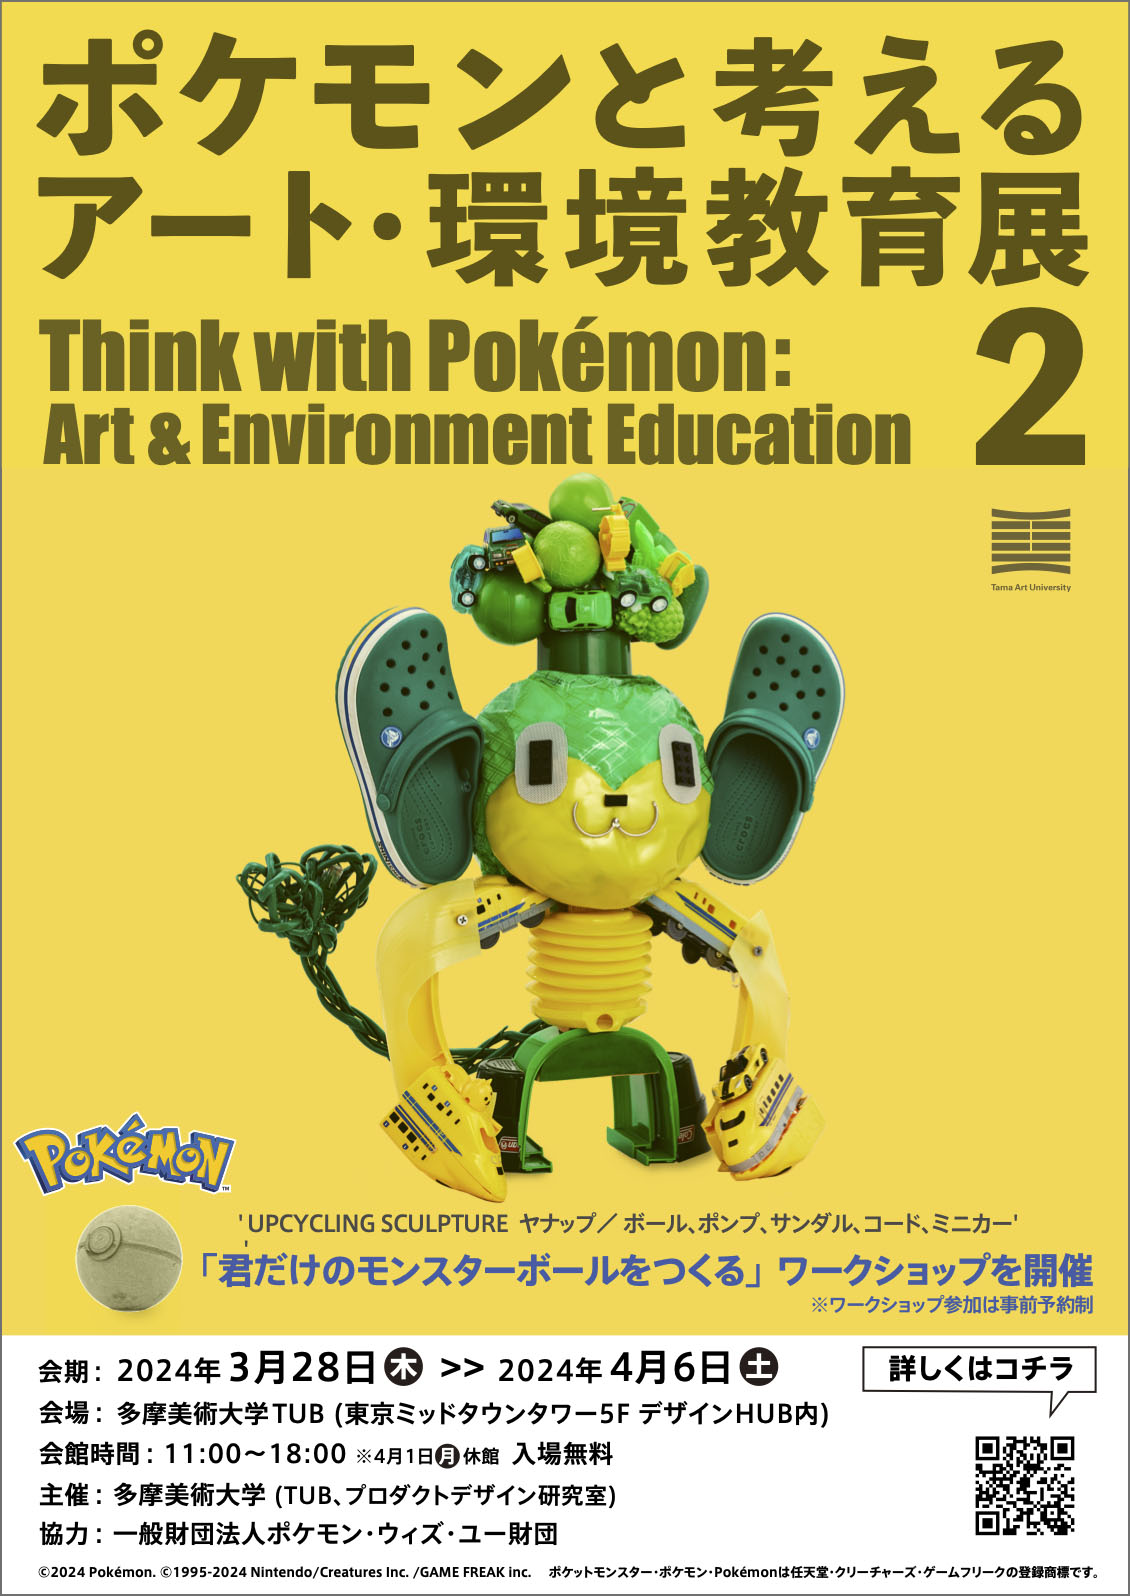 Think with Pokemon art exhibit 2 upcycling sculpture - Pansage